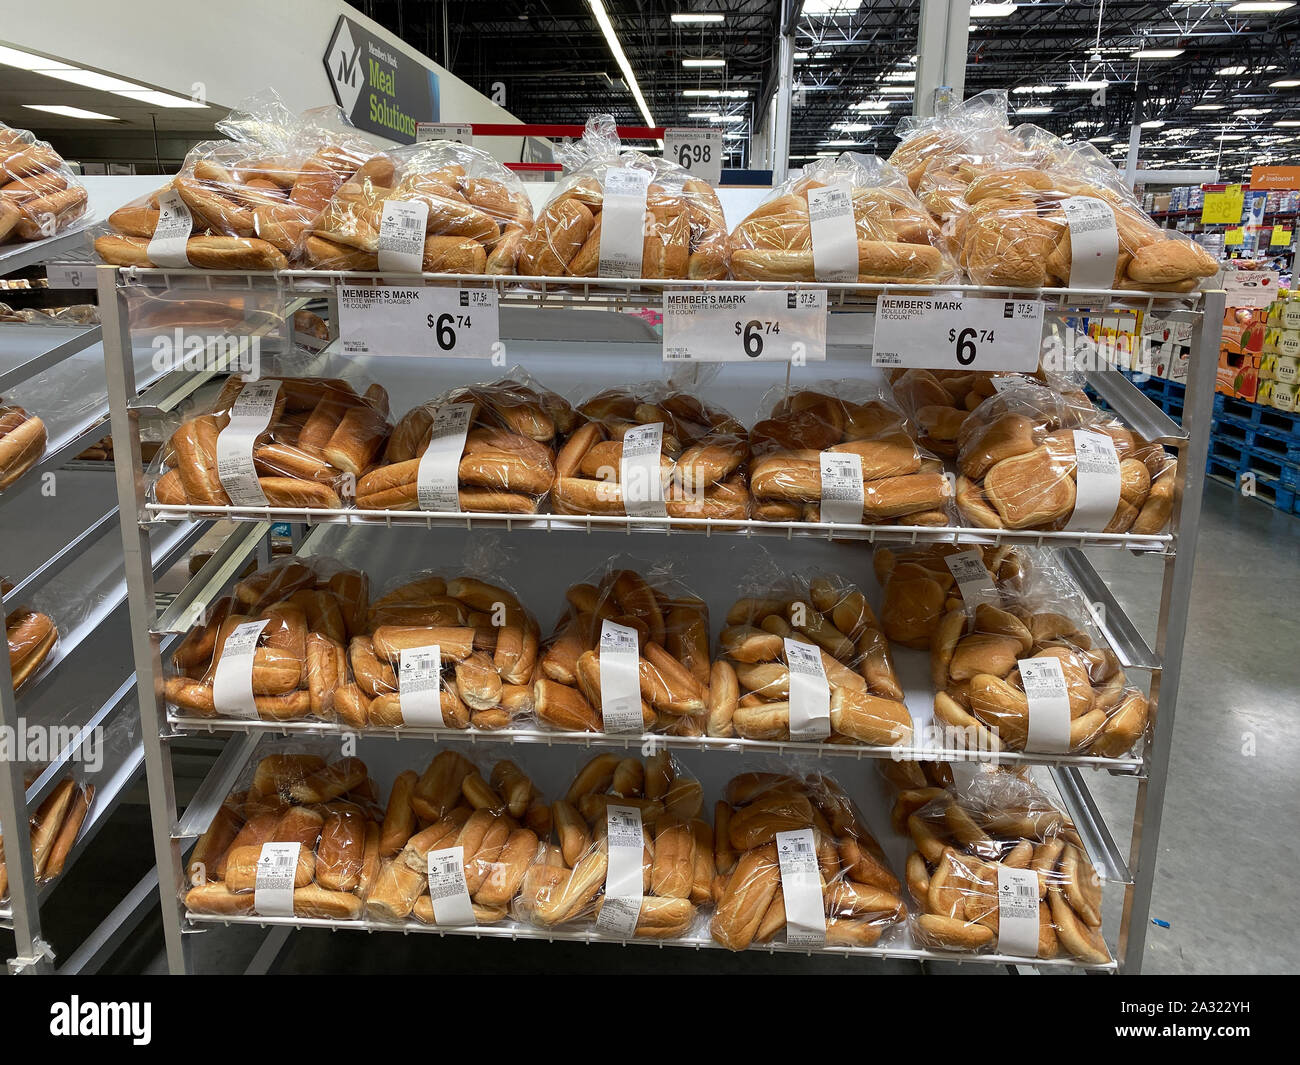 Orlando,FL/USA -10/4/19: Bread, rolls, and buns on the baked goods aisle of  a Sams Club grocery store with fresh breads ready to be purchased by cons  Stock Photo - Alamy